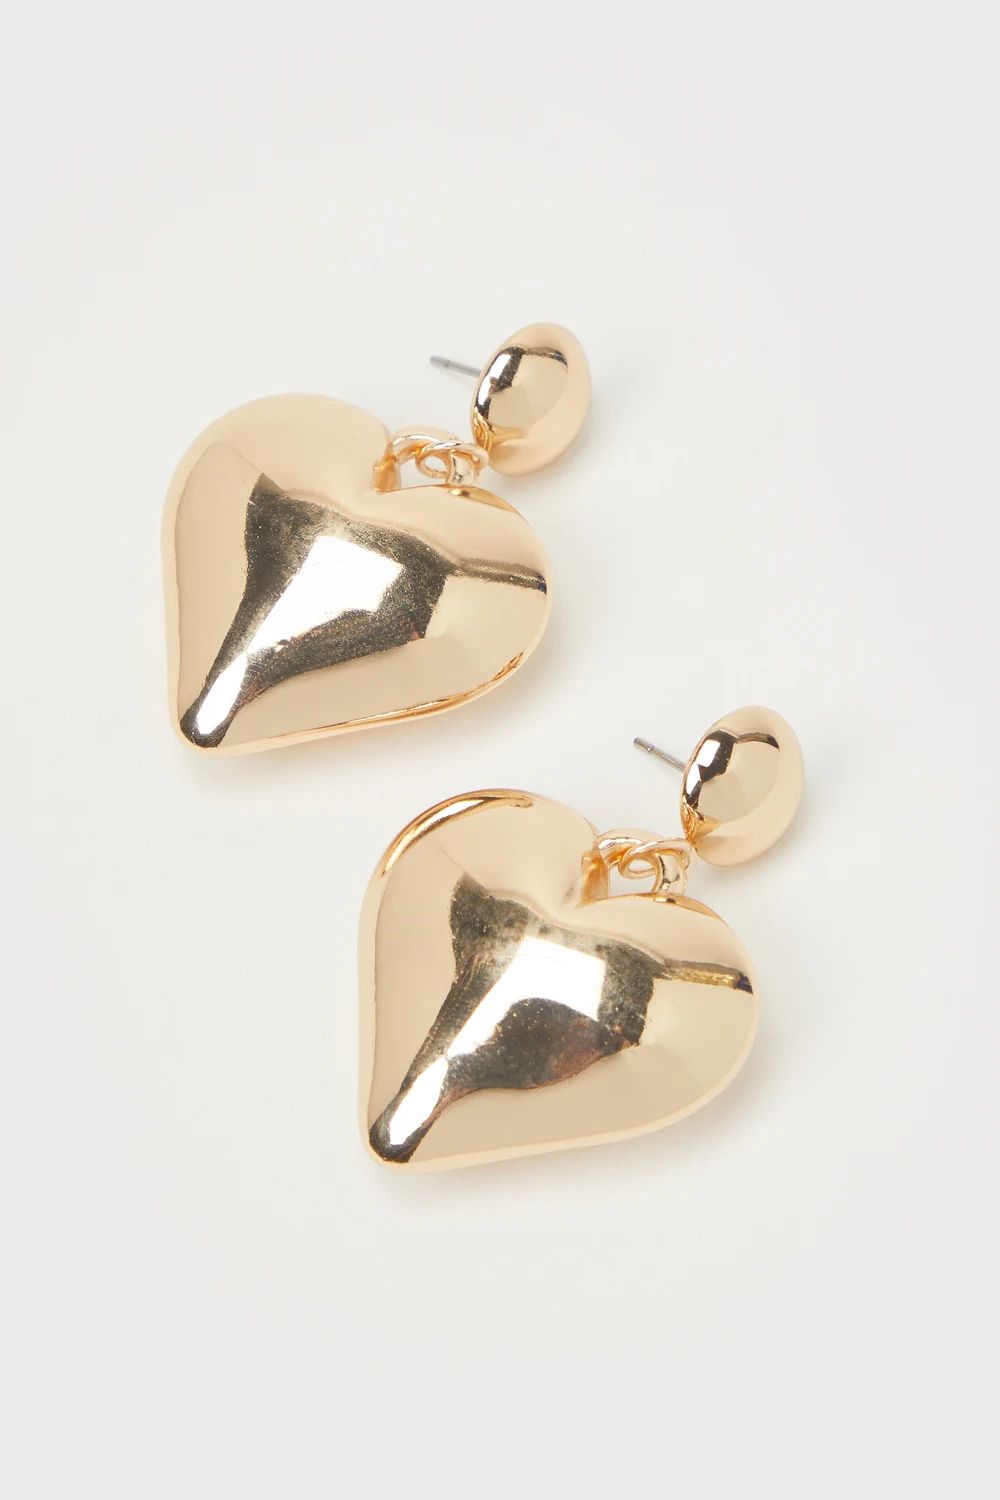 Adorable Love Gold Puffy Heart Statement Earrings | Lulus